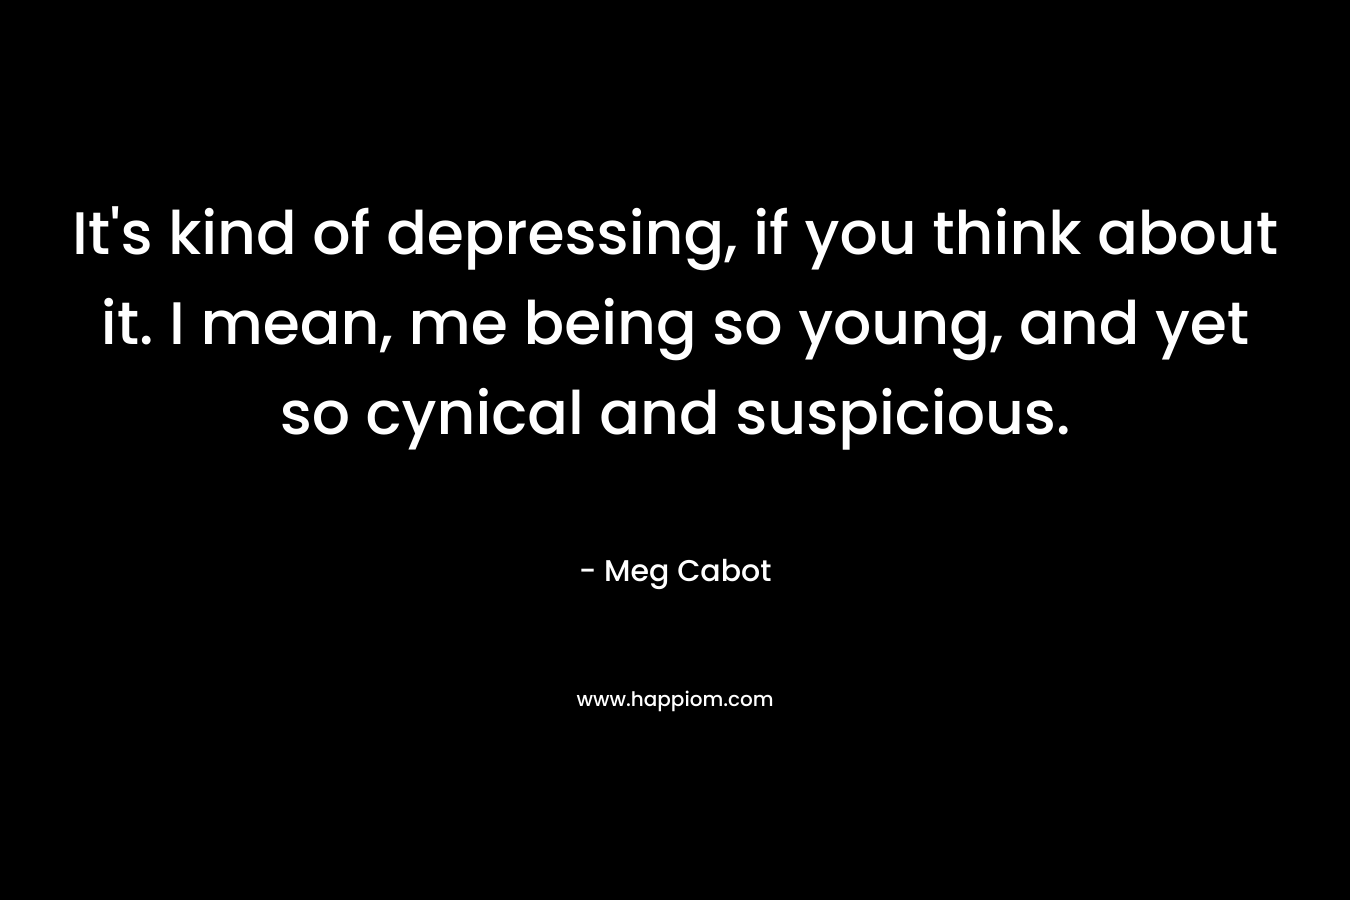 It’s kind of depressing, if you think about it. I mean, me being so young, and yet so cynical and suspicious. – Meg Cabot